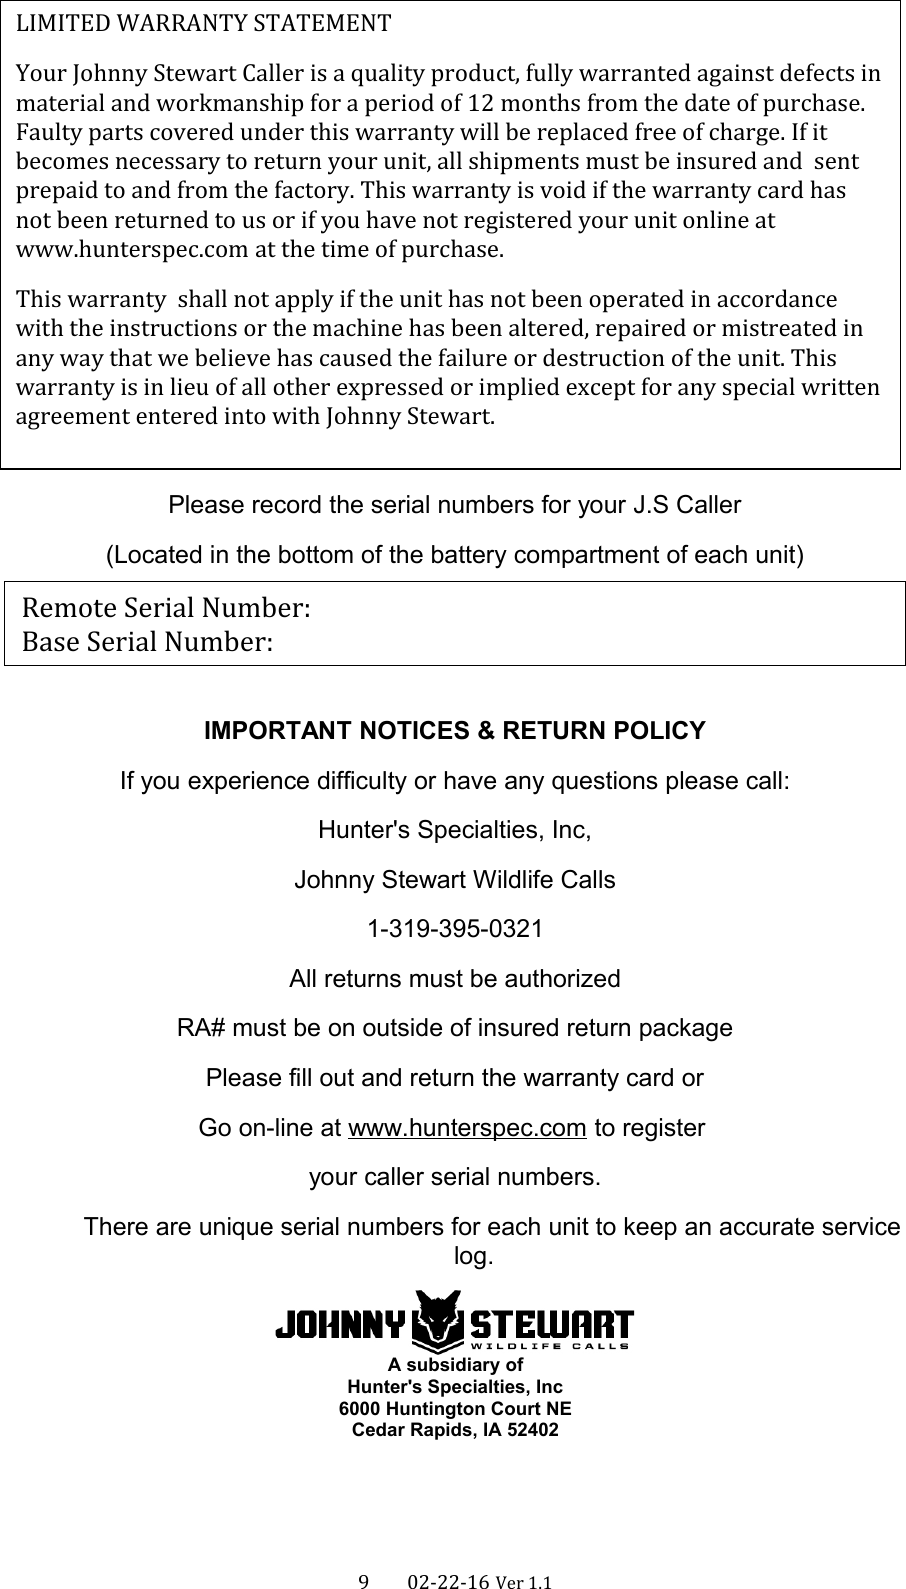 Please record the serial numbers for your J.S Caller(Located in the bottom of the battery compartment of each unit)IMPORTANT NOTICES &amp; RETURN POLICYIf you experience difficulty or have any questions please call:Hunter&apos;s Specialties, Inc,Johnny Stewart Wildlife Calls1-319-395-0321All returns must be authorizedRA# must be on outside of insured return packagePlease fill out and return the warranty card orGo on-line at www.hunterspec.com to register your caller serial numbers.There are unique serial numbers for each unit to keep an accurate servicelog.A subsidiary ofHunter&apos;s Specialties, Inc6000 Huntington Court NECedar Rapids, IA 524029      02-22-16 Ver 1.1LIMITED WARRANTY STATEMENTYour Johnny Stewart Caller is a quality product, fully warranted against defects in material and workmanship for a period of 12 months from the date of purchase. Faulty parts covered under this warranty will be replaced free of charge. If it becomes necessary to return your unit, all shipments must be insured and  sent prepaid to and from the factory. This warranty is void if the warranty card has not been returned to us or if you have not registered your unit online at www.hunterspec.com at the time of purchase. This warranty  shall not apply if the unit has not been operated in accordance with the instructions or the machine has been altered, repaired or mistreated in any way that we believe has caused the failure or destruction of the unit. This warranty is in lieu of all other expressed or implied except for any special written agreement entered into with Johnny Stewart.Remote Serial Number:              Base Serial Number: